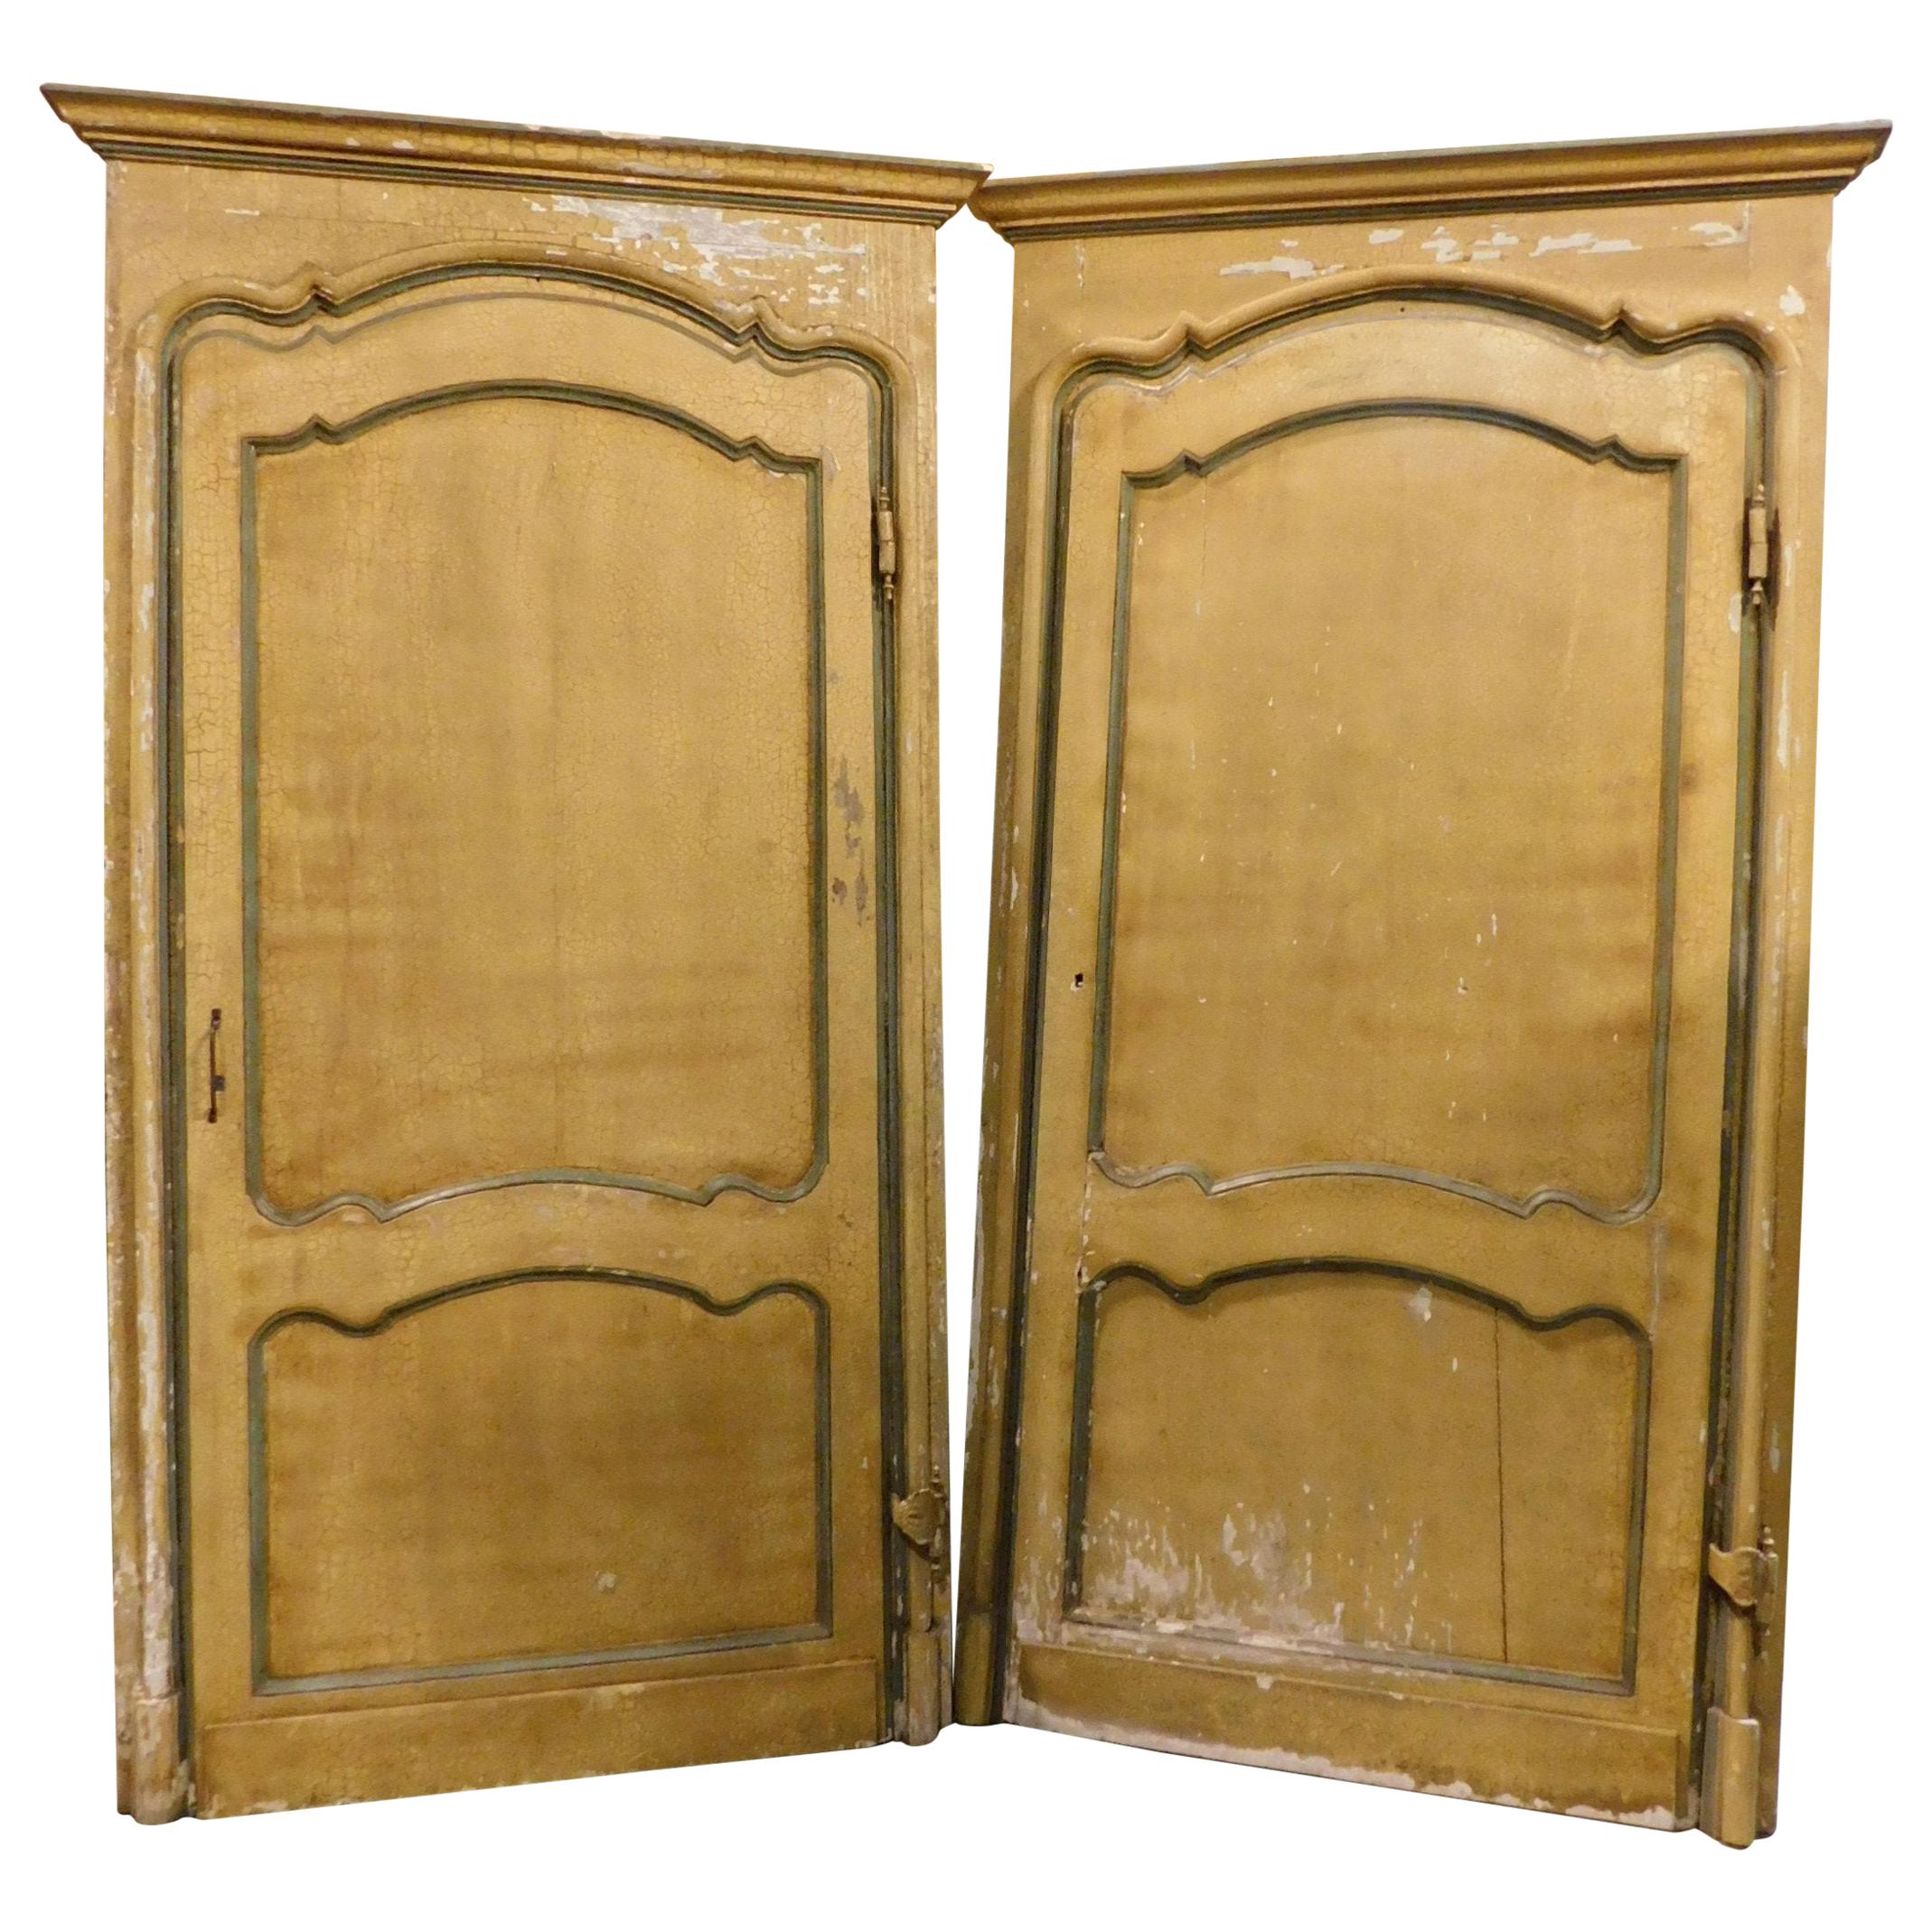 Antique Pair of Yellow Lacquered Doors with Original Frame, 18th Century, Italy